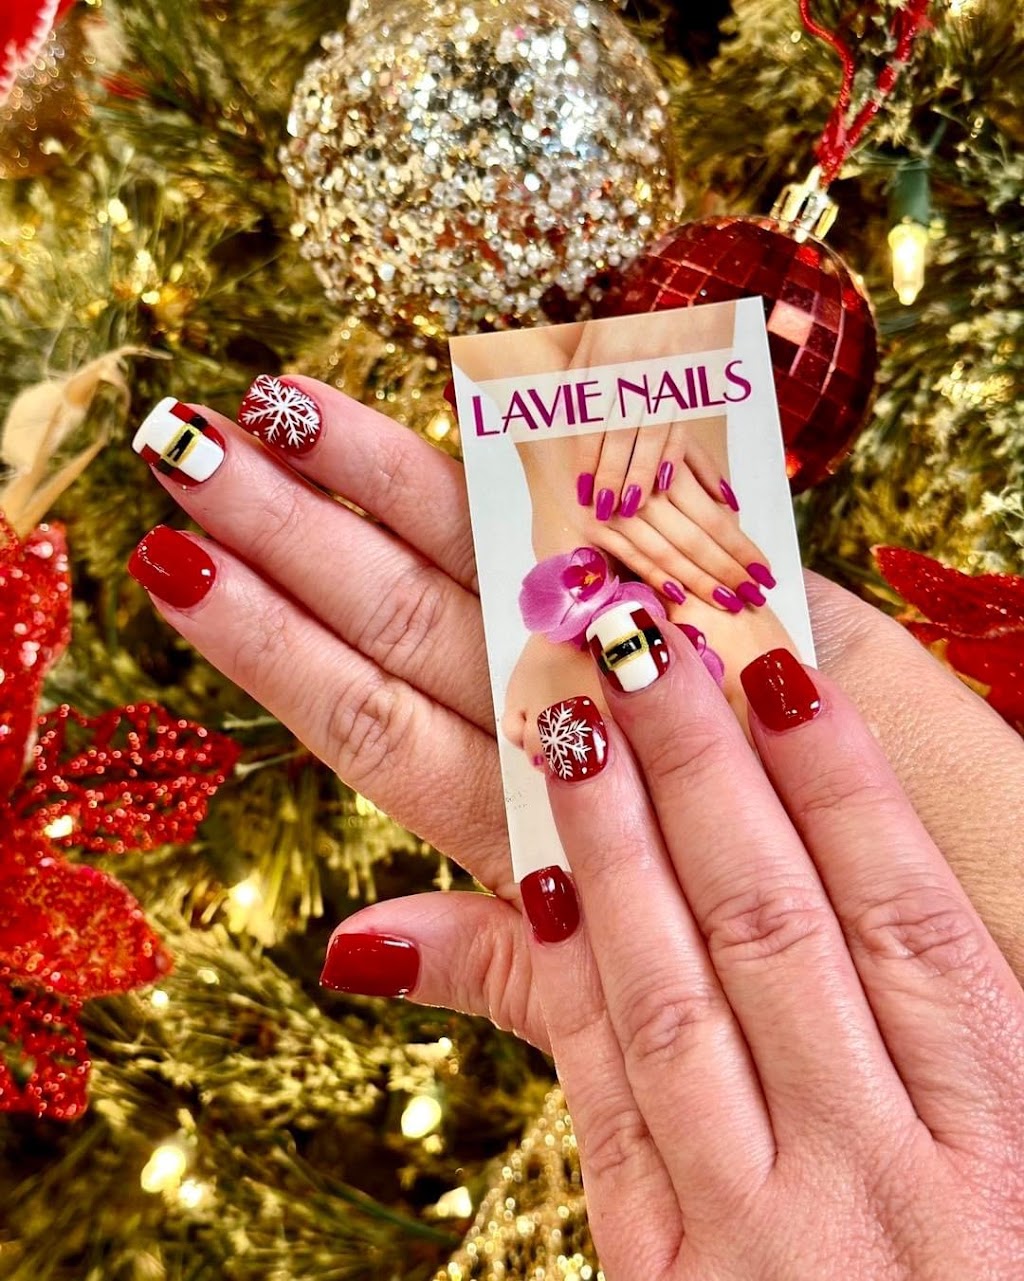 LaVie Nails & Spa - Greenville, Texas | 7215 I-30 Frontage Rd G, Greenville, TX 75402, USA | Phone: (903) 454-1500